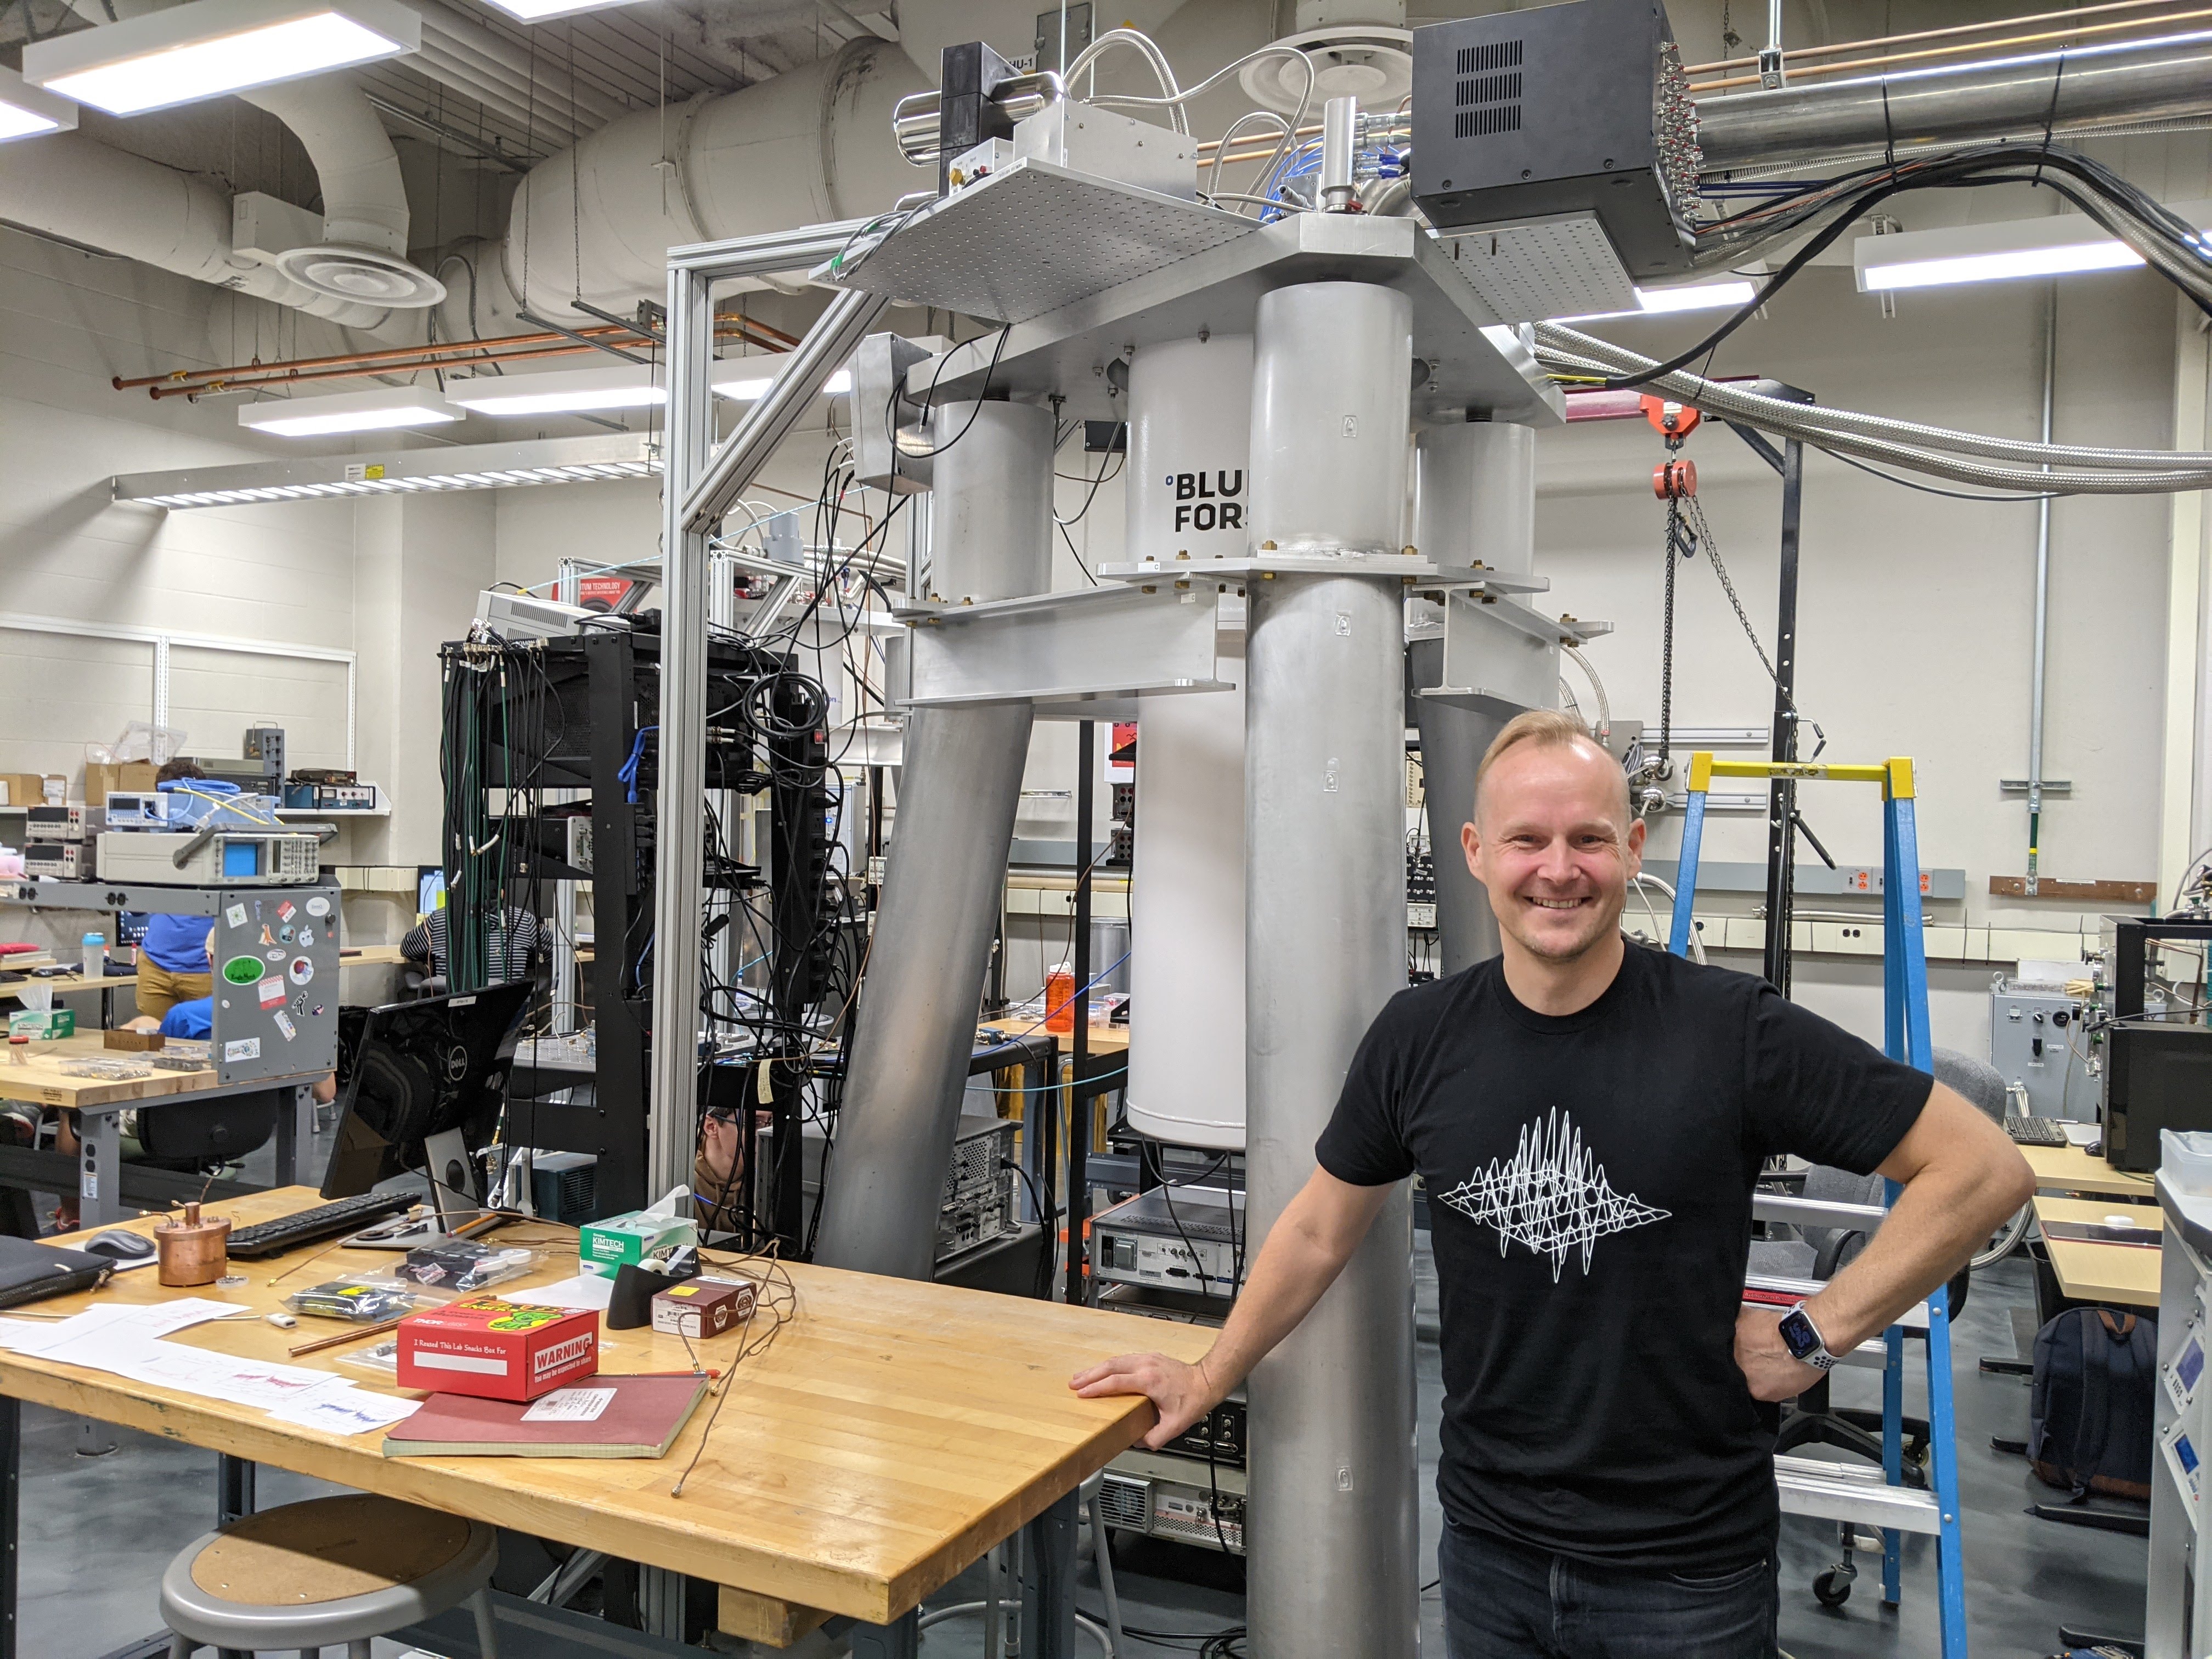 Jerry Cowen Endowed Chair of Experimental Physics Johannes Pollanen in his quantum physics workshop with metal machinery and racks of electronic devices.